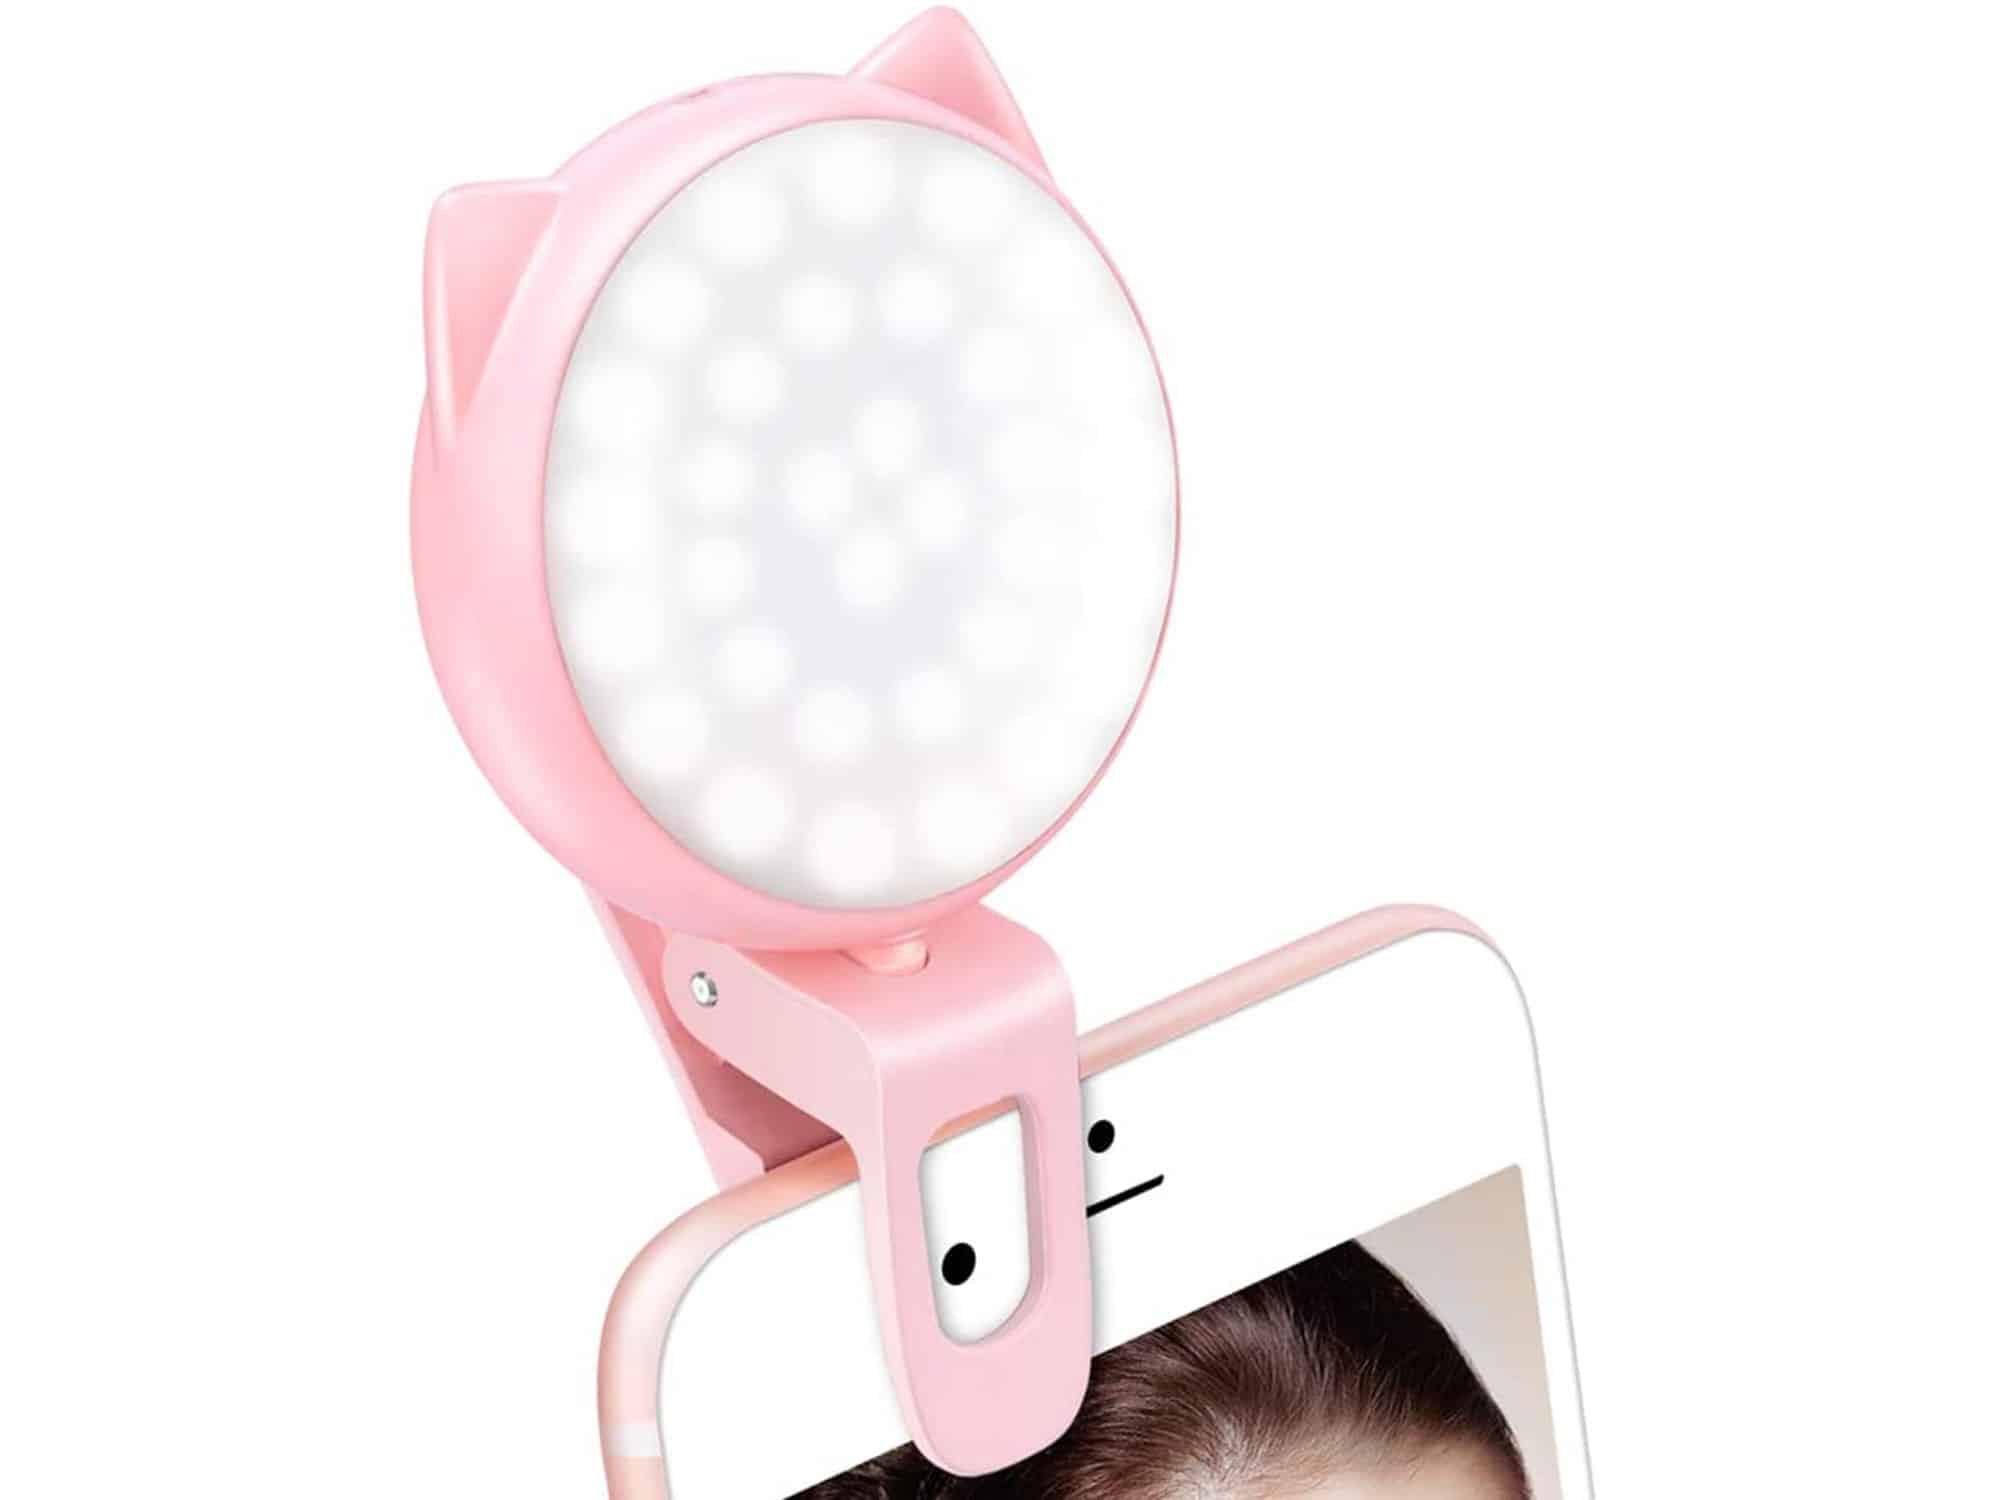 Selfie Ring Light for iPhone, Mini Clip on Fill Light for Camera, Video, Rechargeable 9-Level Adjustable Brightness Circle Light with 32 LED, Max 8 Running Hrs, USB Photo Light for Photography Laptop